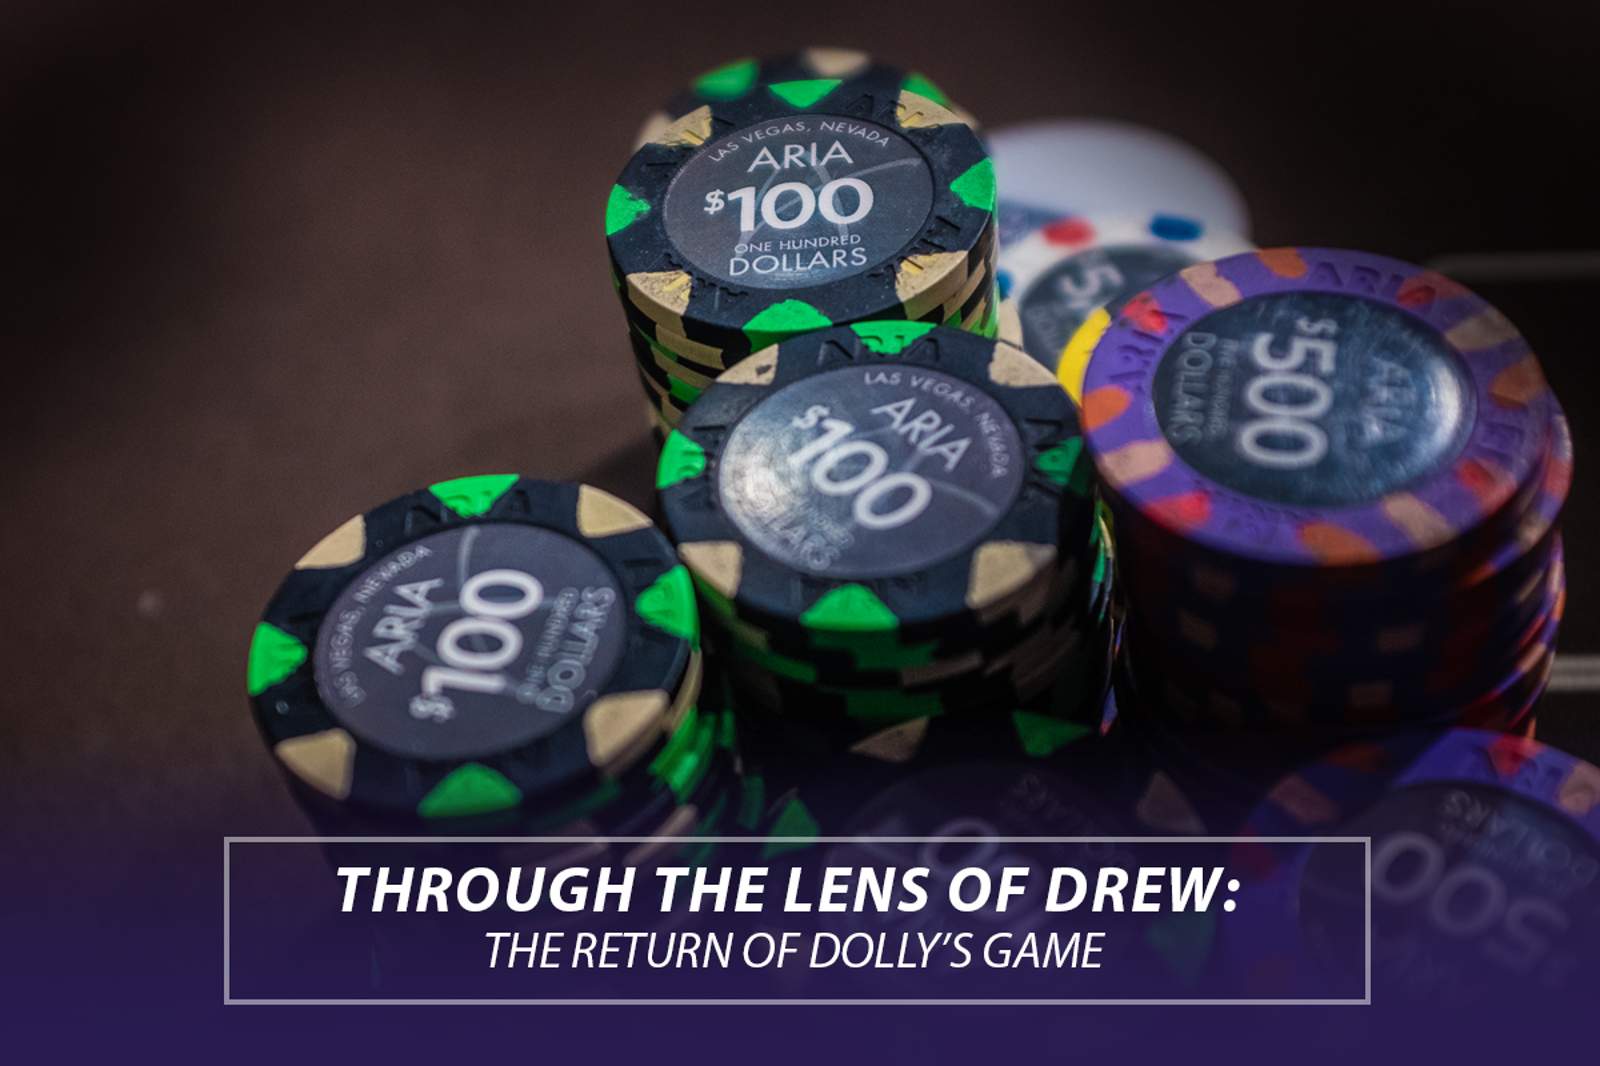 Through the Lens: The Return of Dolly's Game